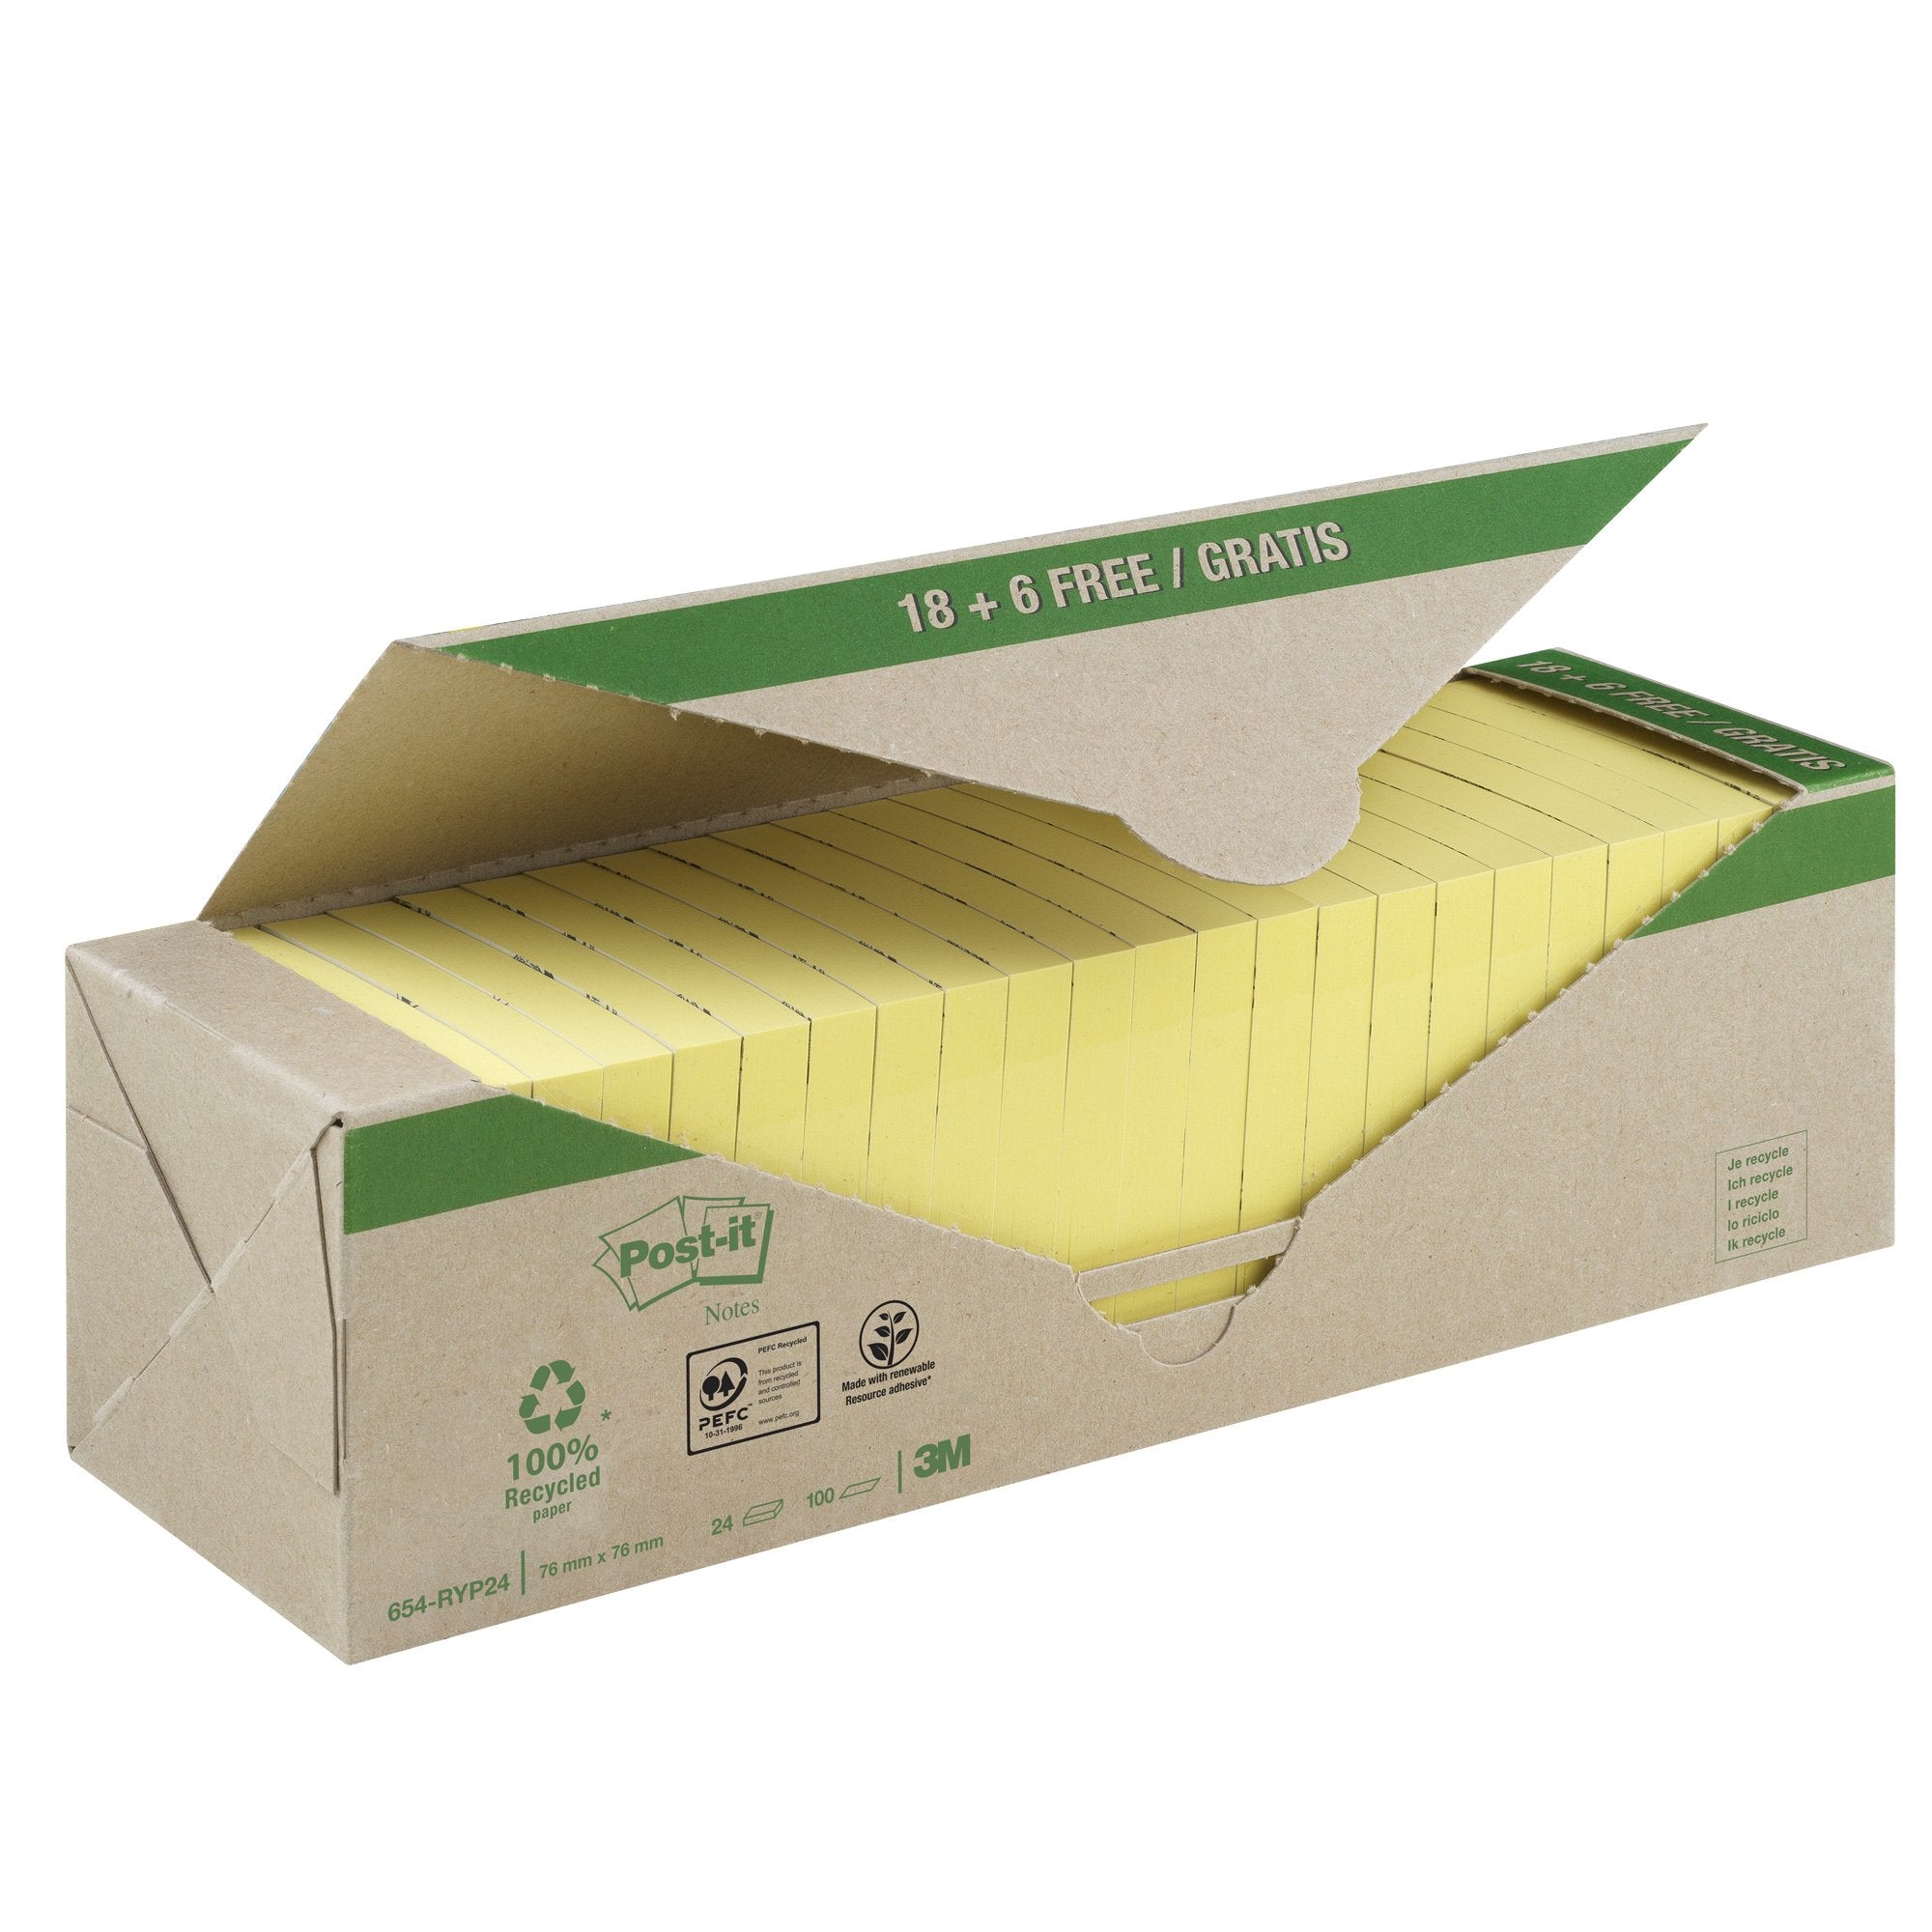 post-it-value-pack-24-blocco-100fg-carta-riciclata-giallo-76x76mm-654-ryp24